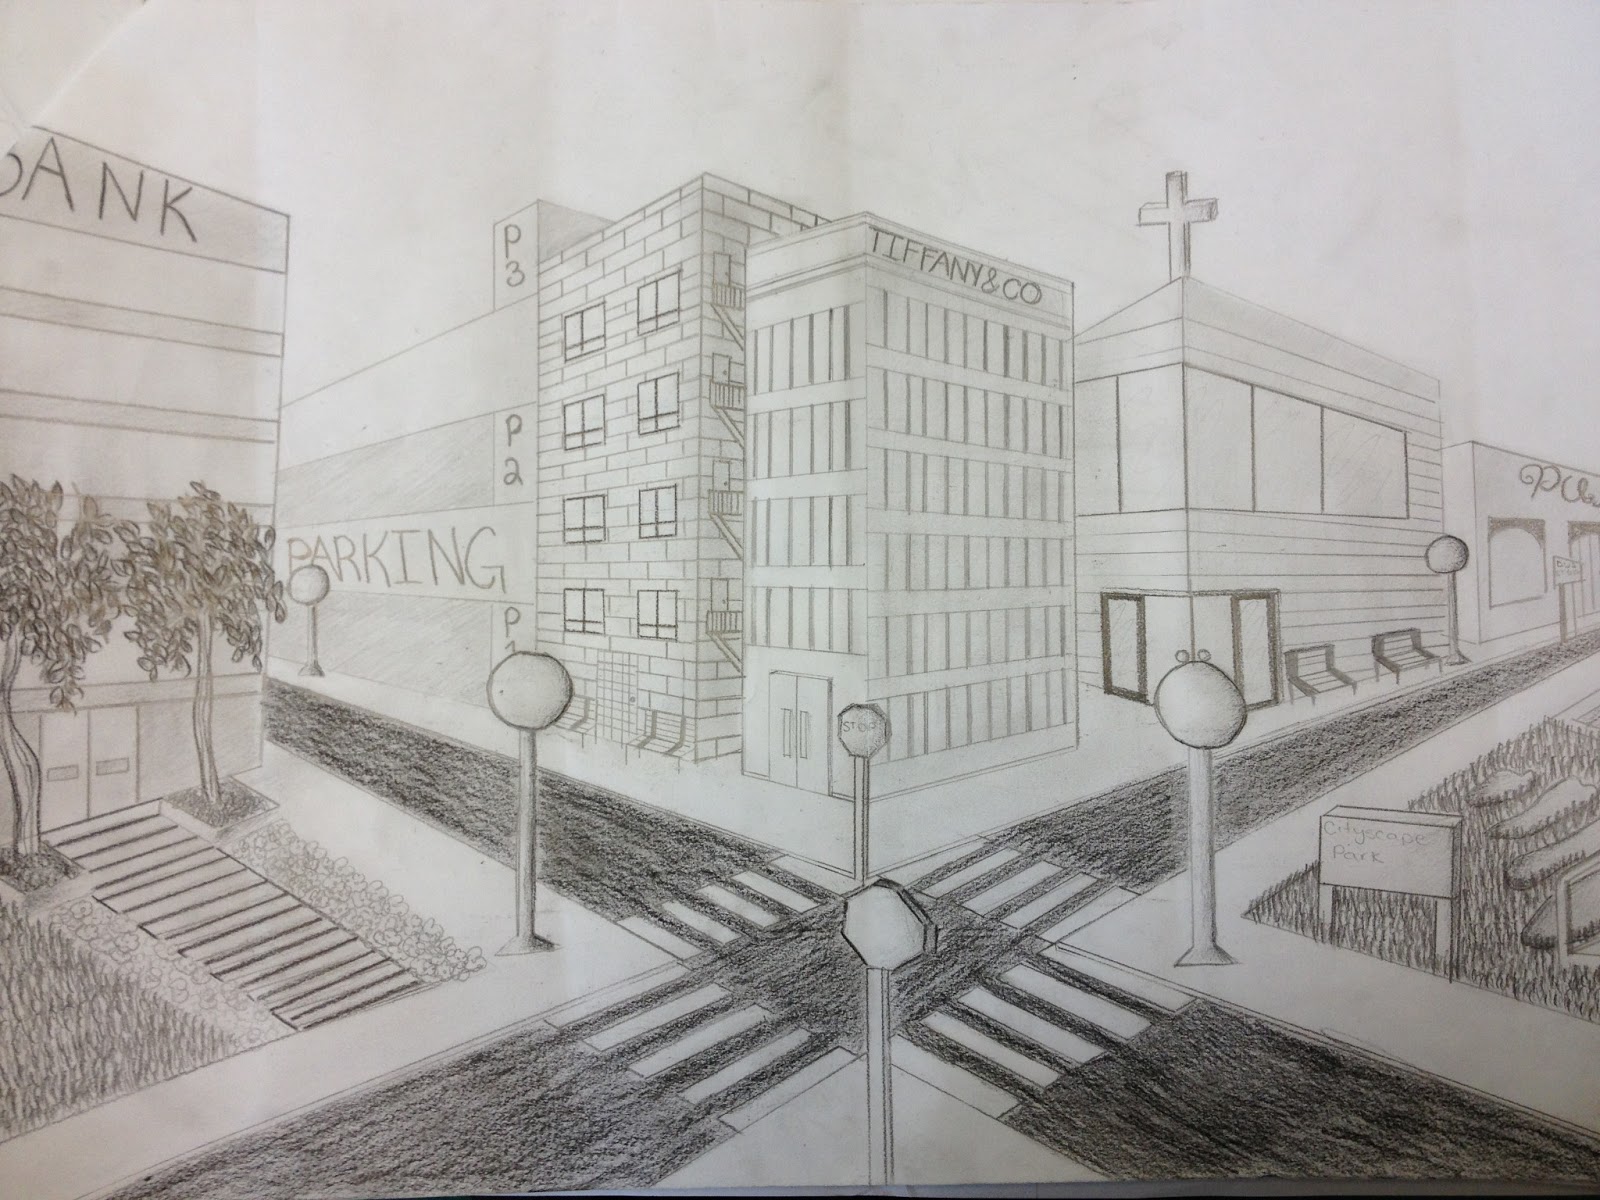 Mr. Sterken's Class: City Scape 2 Point Perspective Drawings